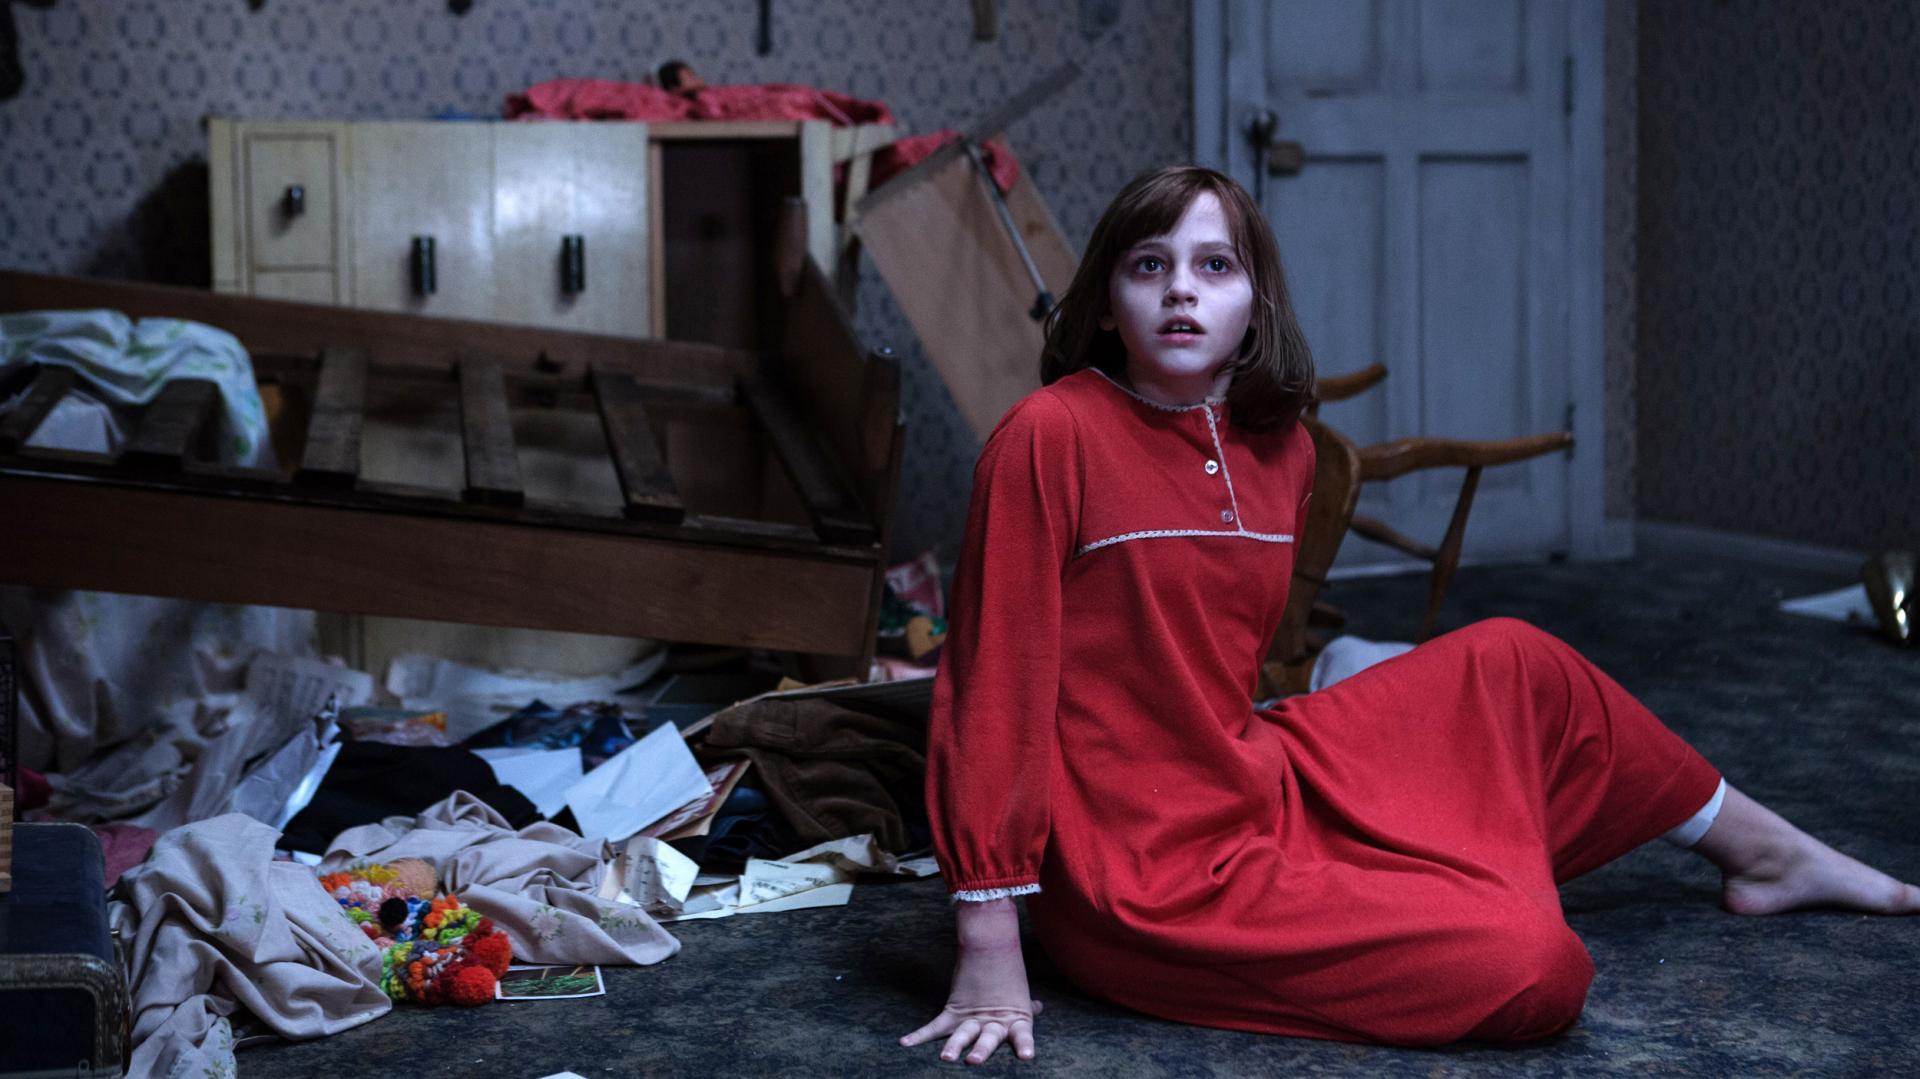 Image gallery for The Conjuring 2 The Enfield Poltergeist FilmAffinity